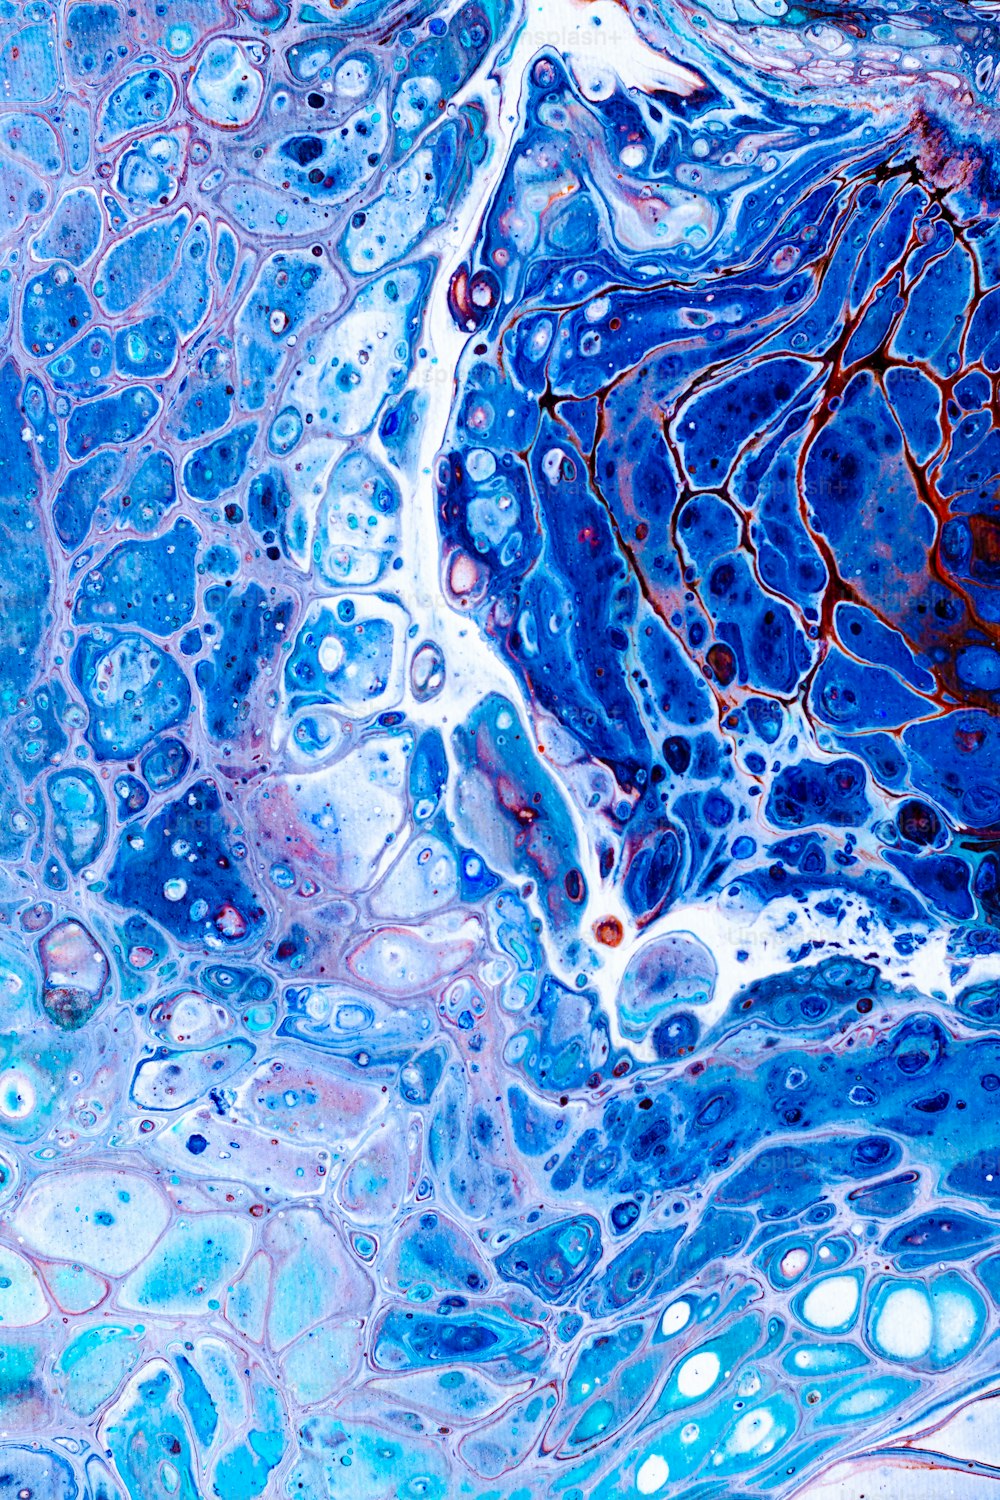 a close up of a blue and red fluid substance